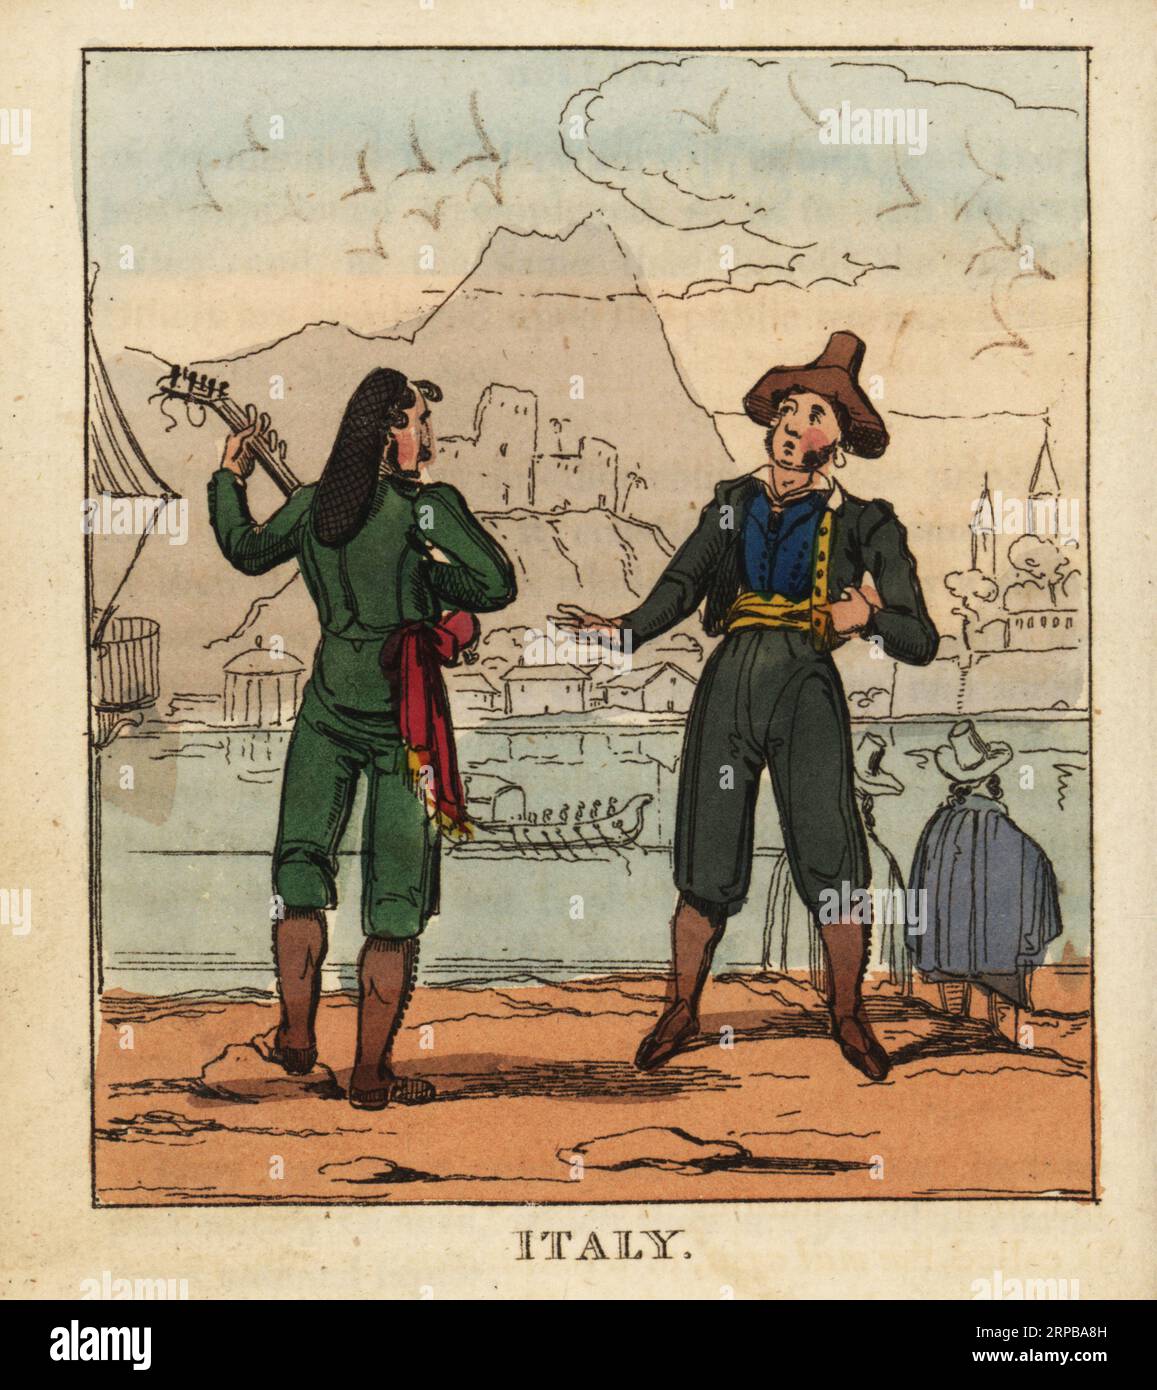 Costumes of Italian men, 19th century. A musician in green jacket and breeches, brown gaiters plays the chitarra or guitar. A singer in tall hat performs beside him. Handcoloured copperplate engraving from The World in Miniature, or Panorama of the Costumes, Manners & Customs of All Nations, John Bysh, London, 1825. Stock Photo